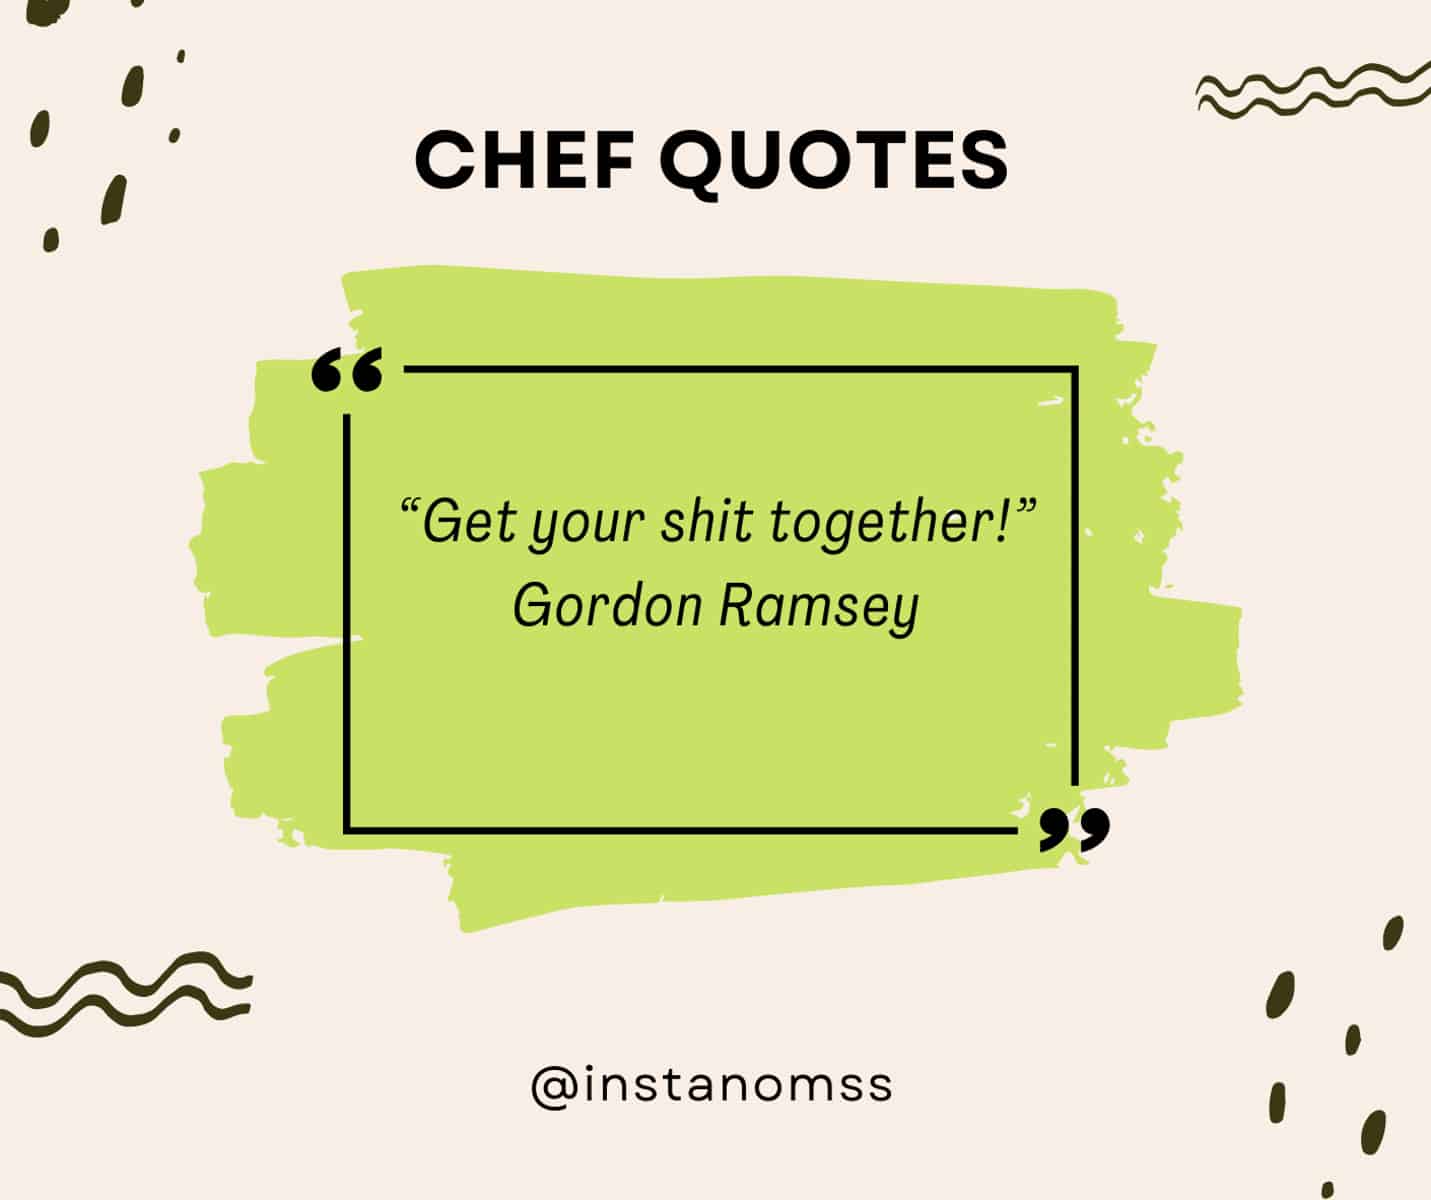 “Get your shit together!” Gordon Ramsey